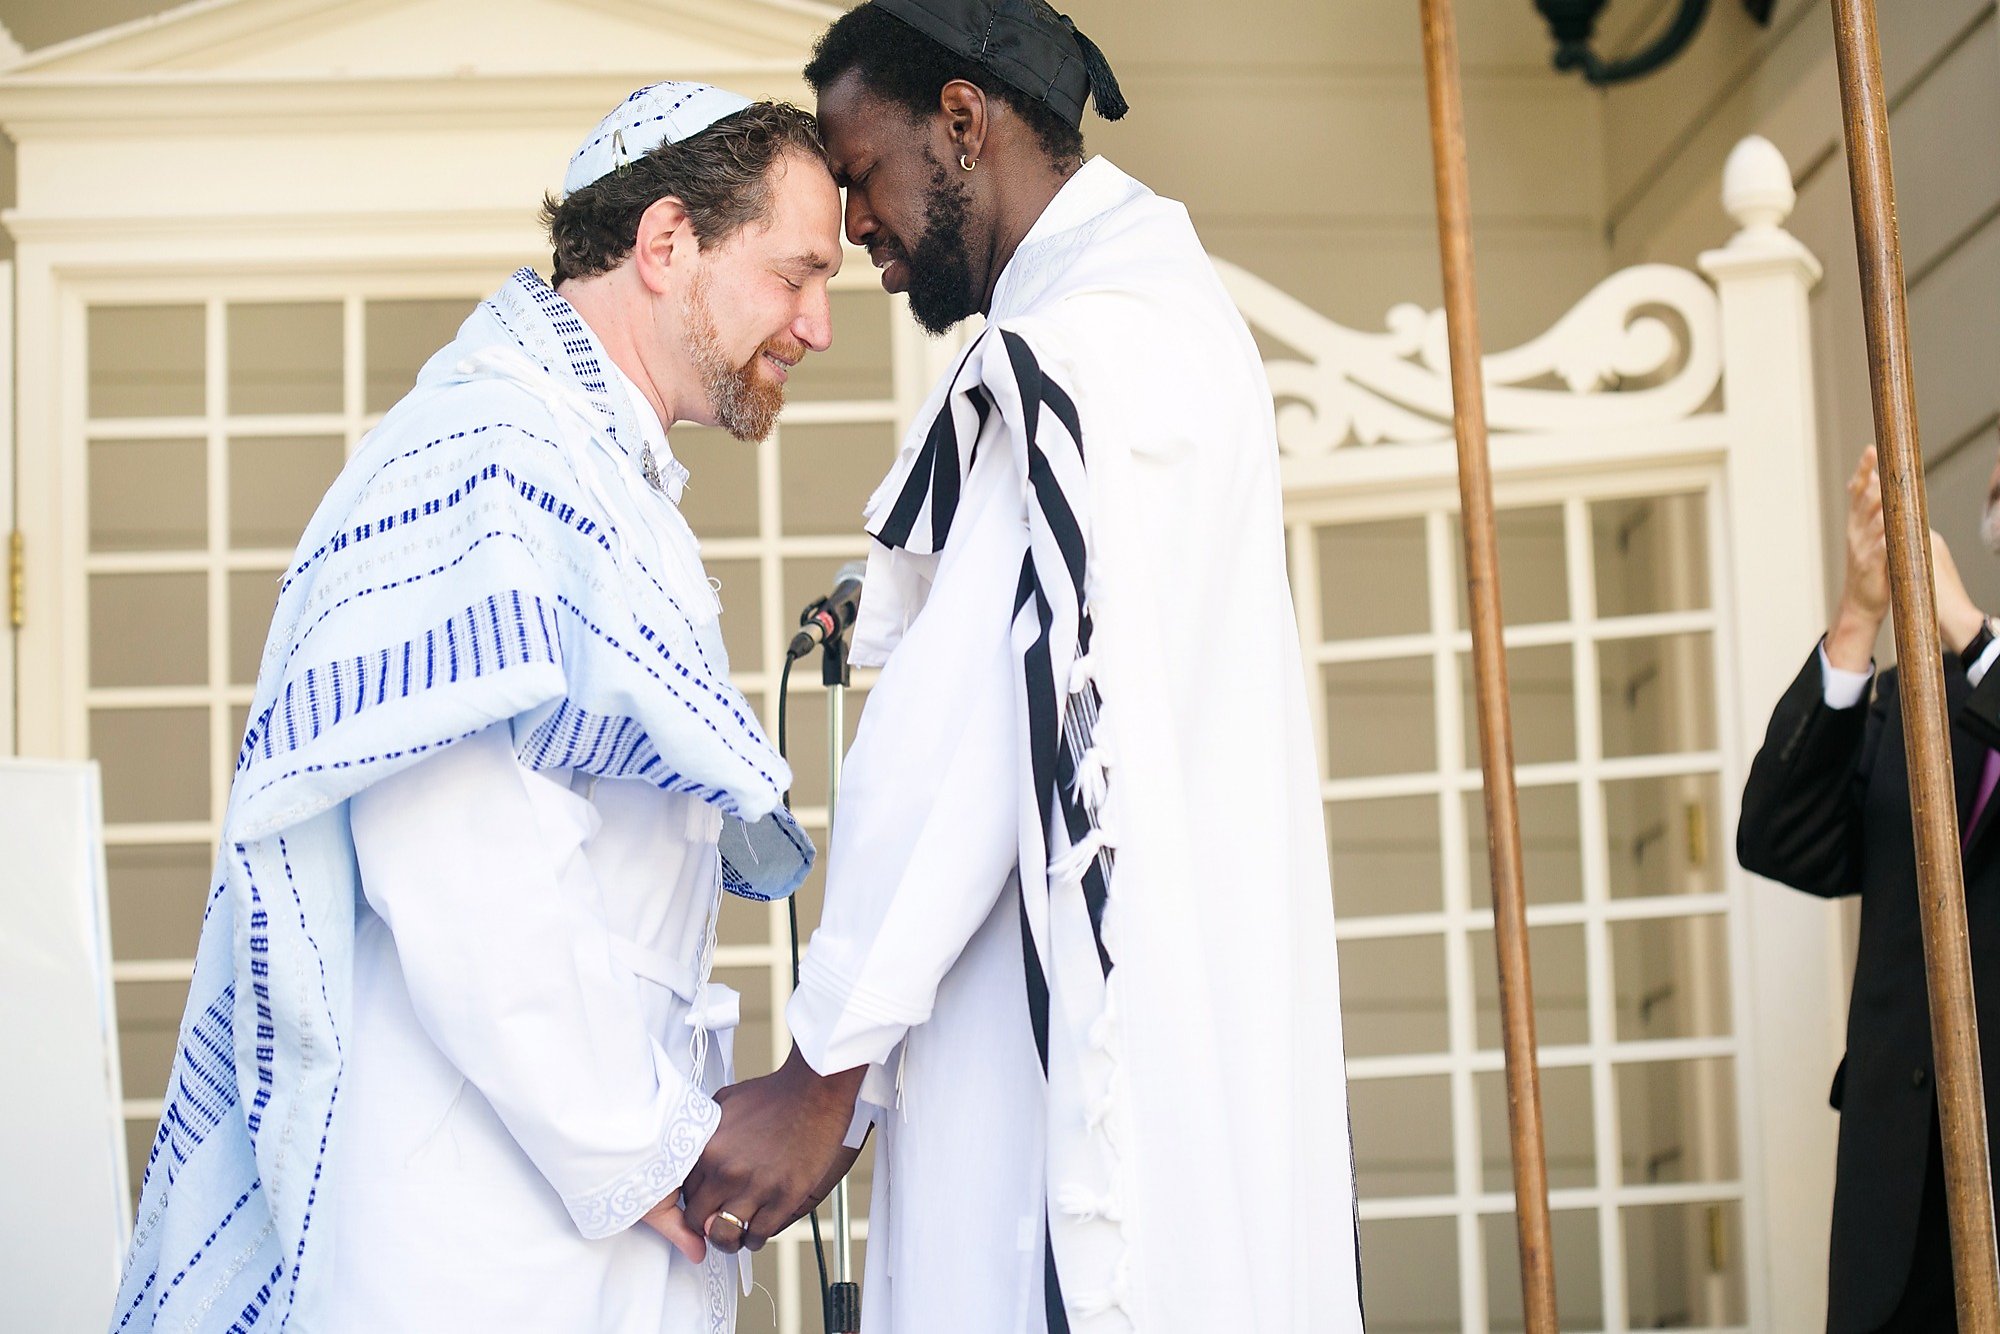 Evanston native to become first female and first gay rabbi